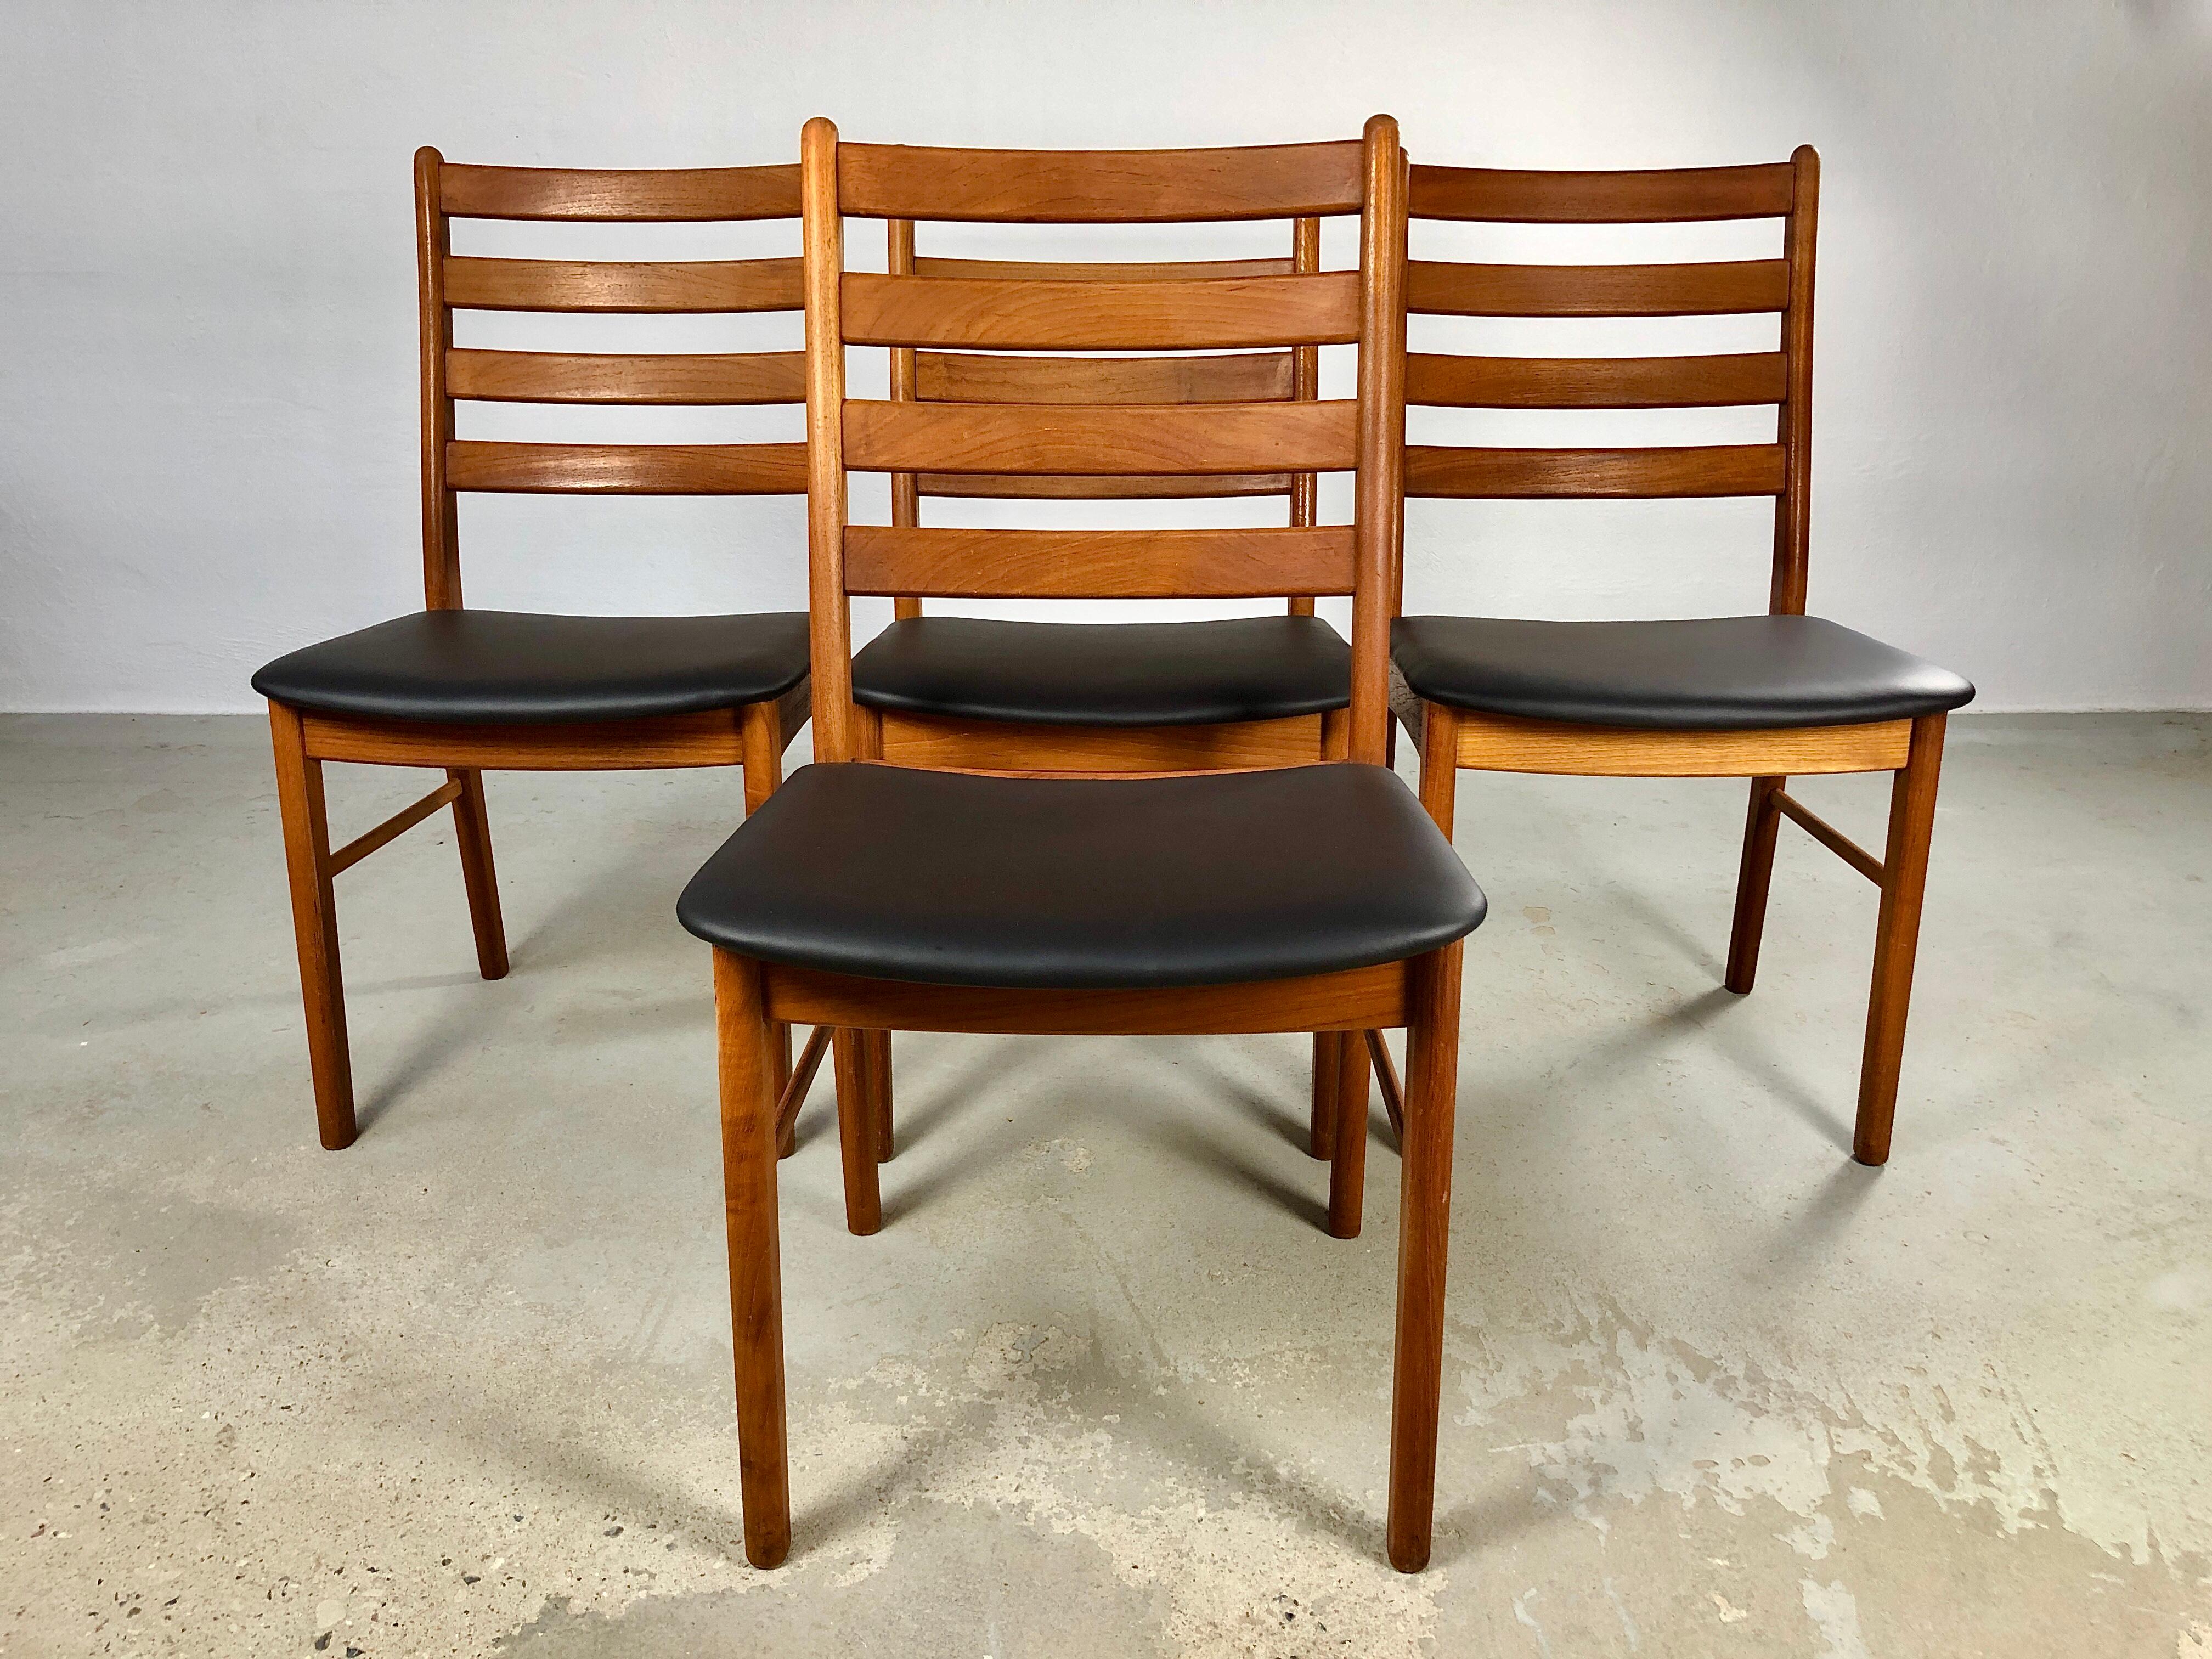 1970´s four Danish teak dining chairs with leathered seats by Korup Stolefabrik.

The set of 4 chairs have been fully restored, refinished by our cabinetmakers and reupholstered by our skilled upholsteres with new foam and Spectrum Coffee leather